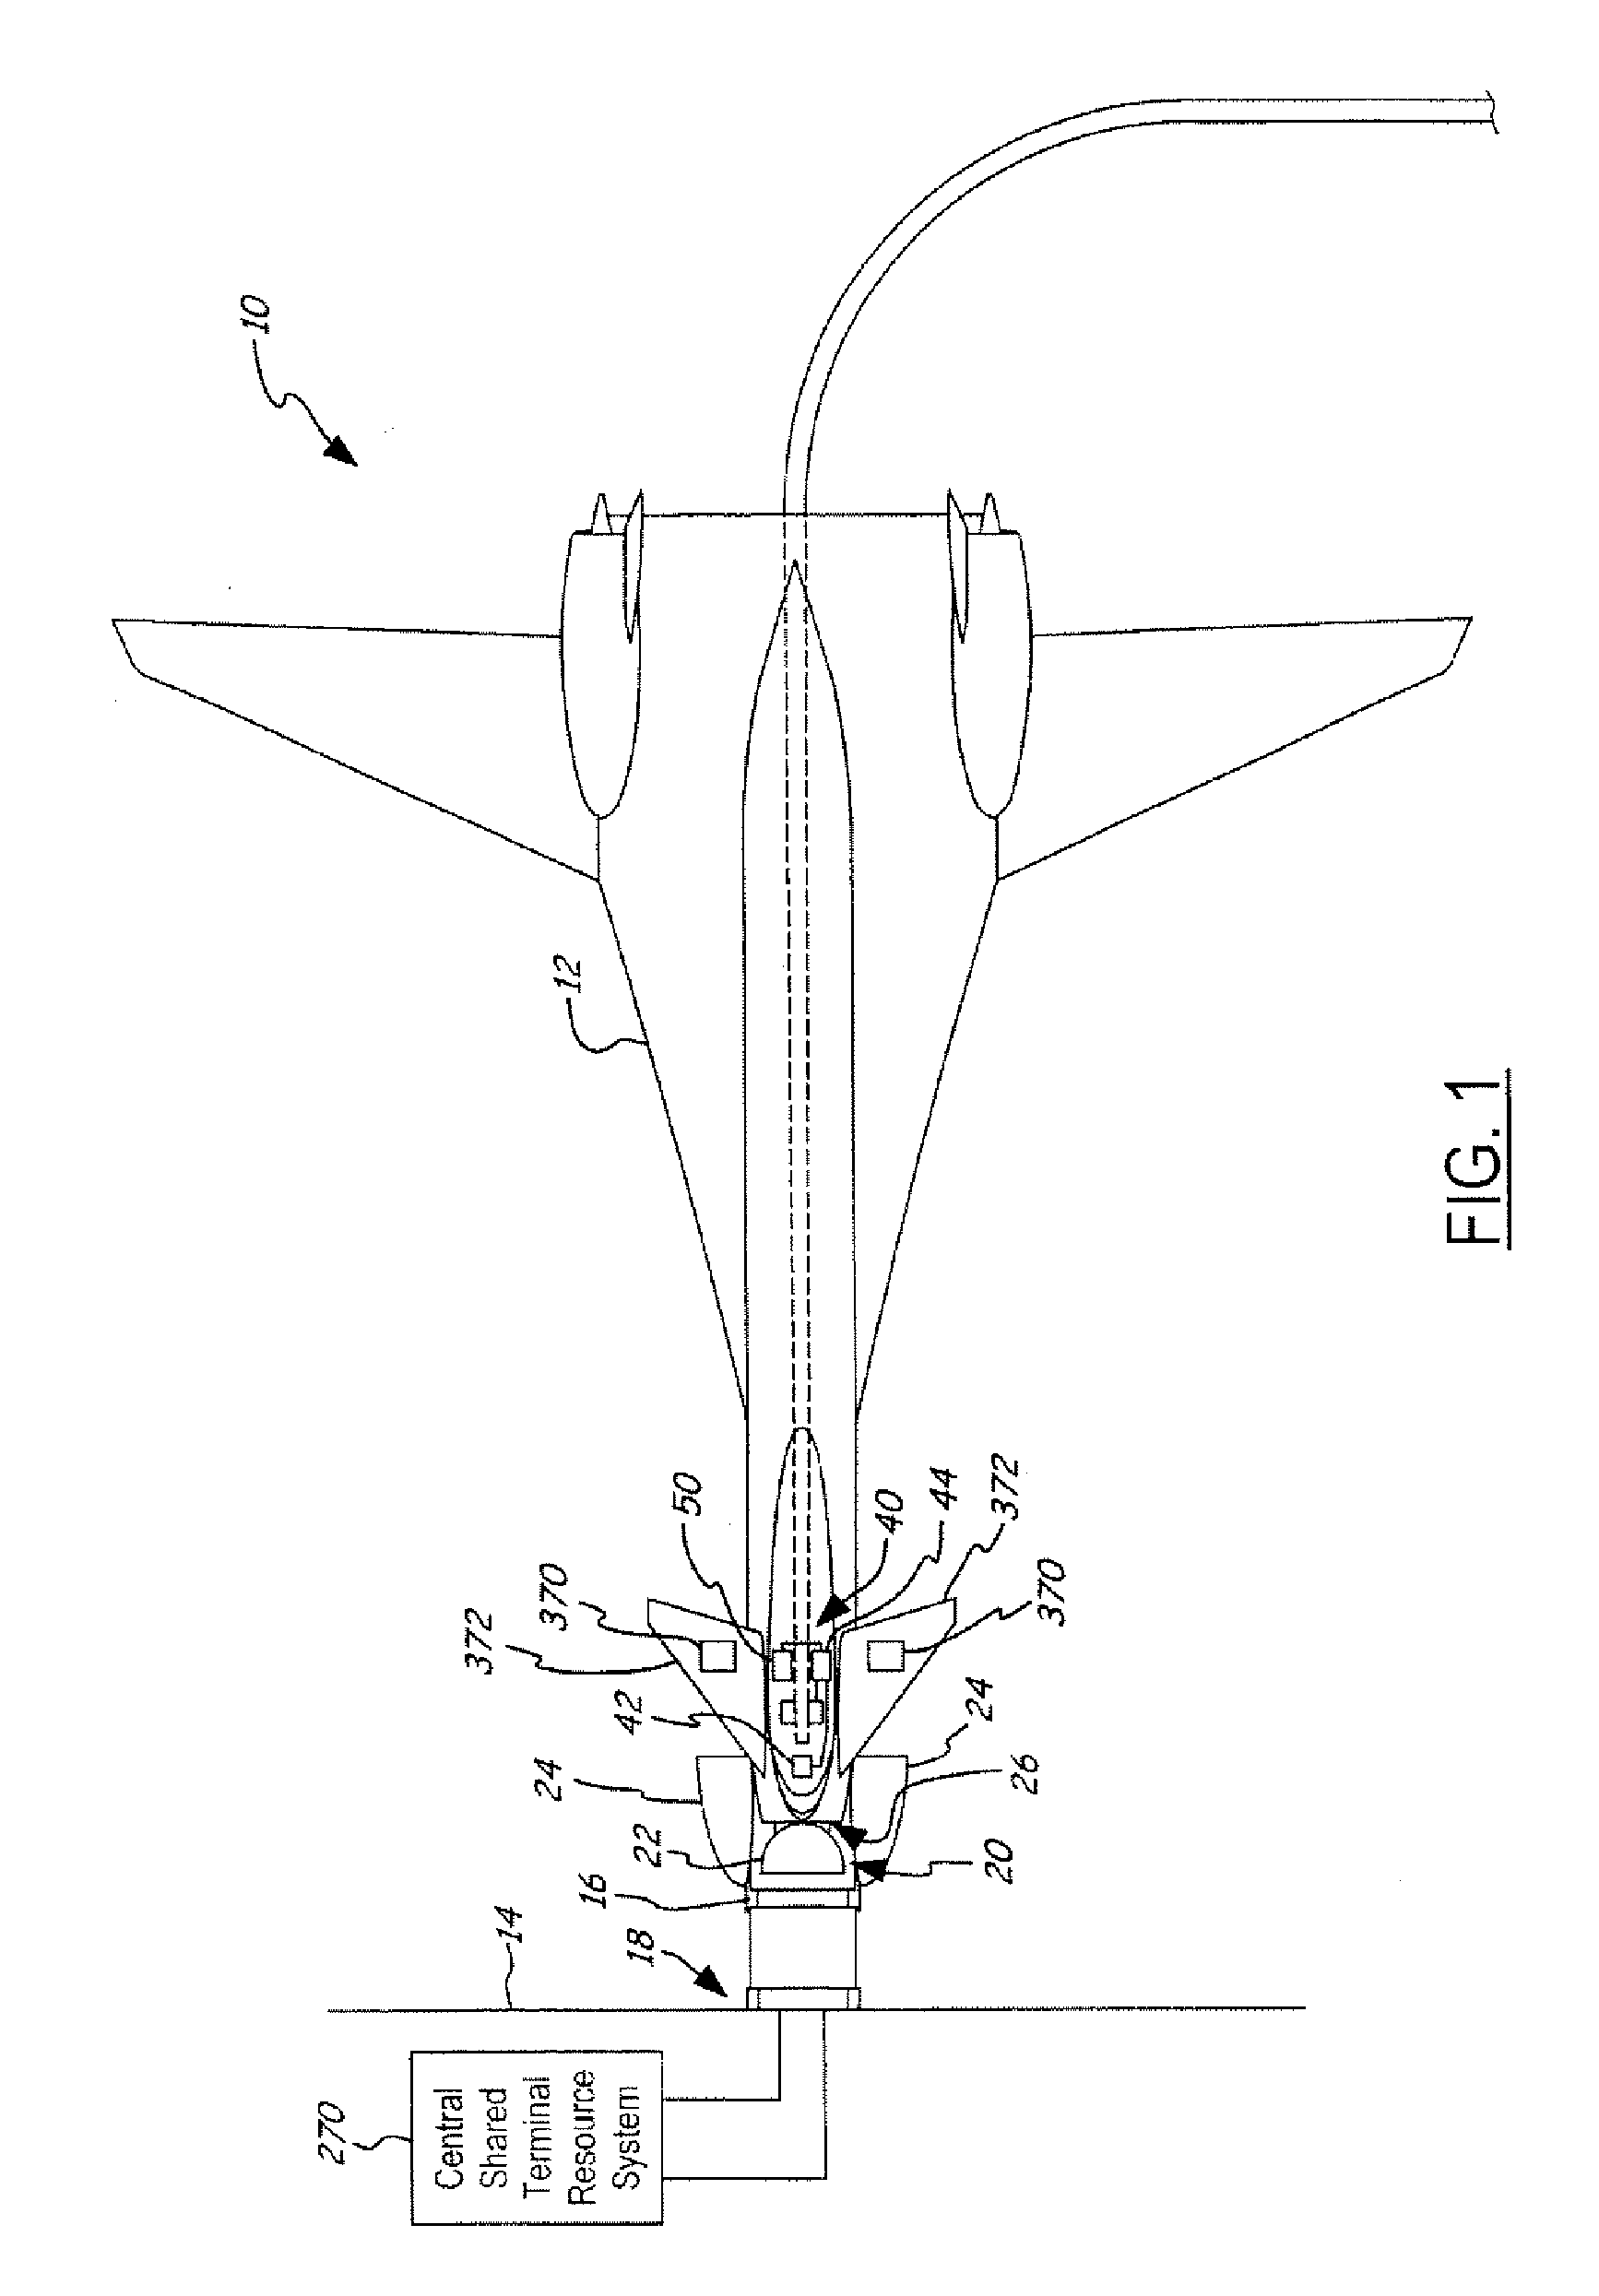 Terminal docking port for an operational ground support system